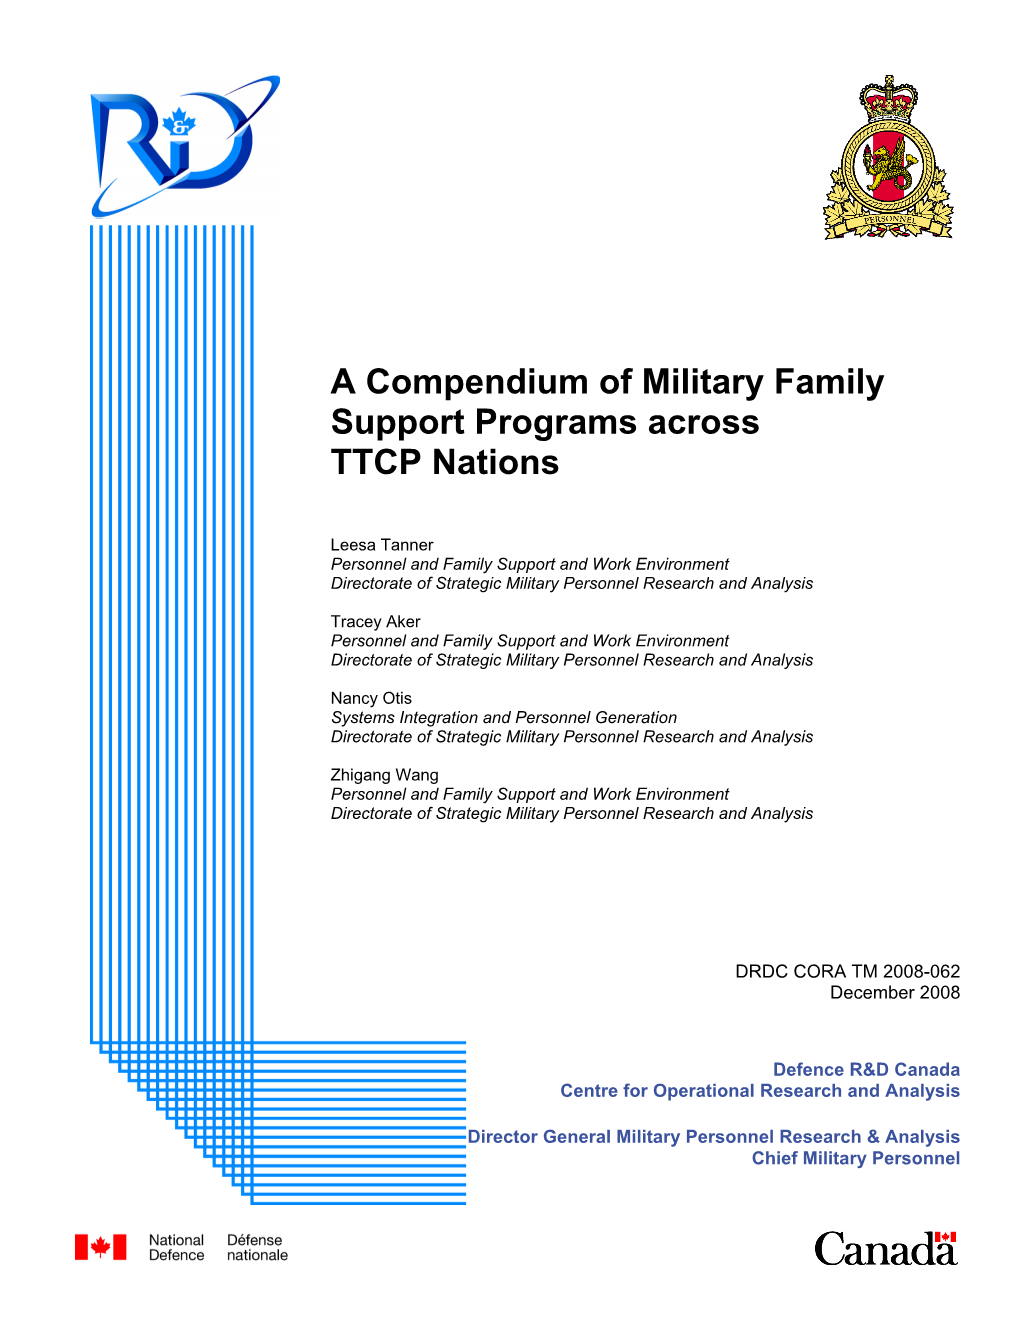 A Compedium of Military Family Support Programs Across TTCP